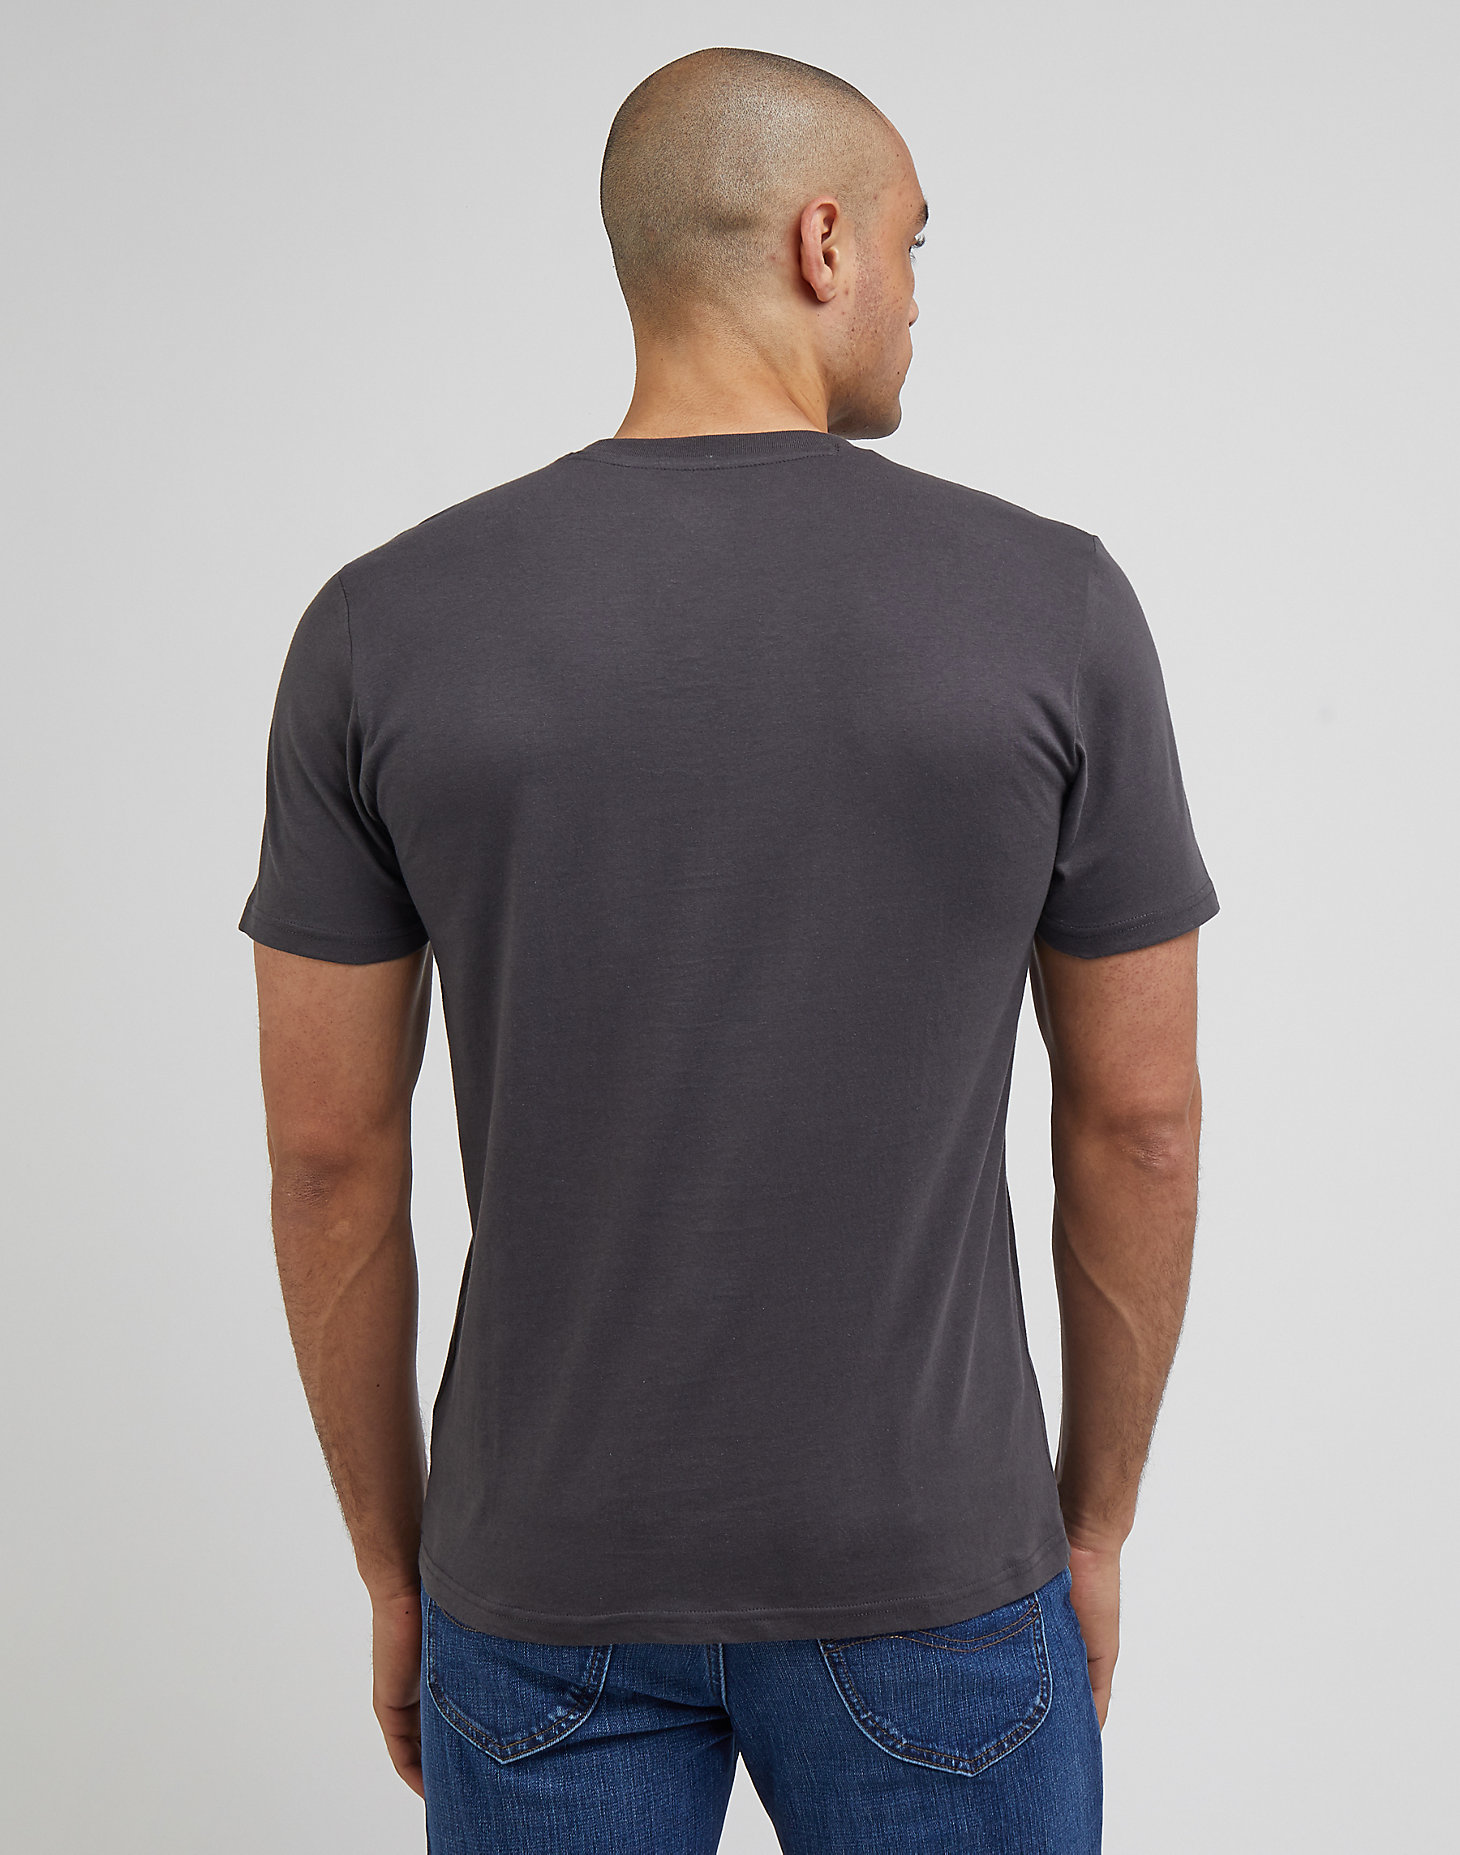 Medium Wobbly Lee Tee in Washed Black alternative view 1